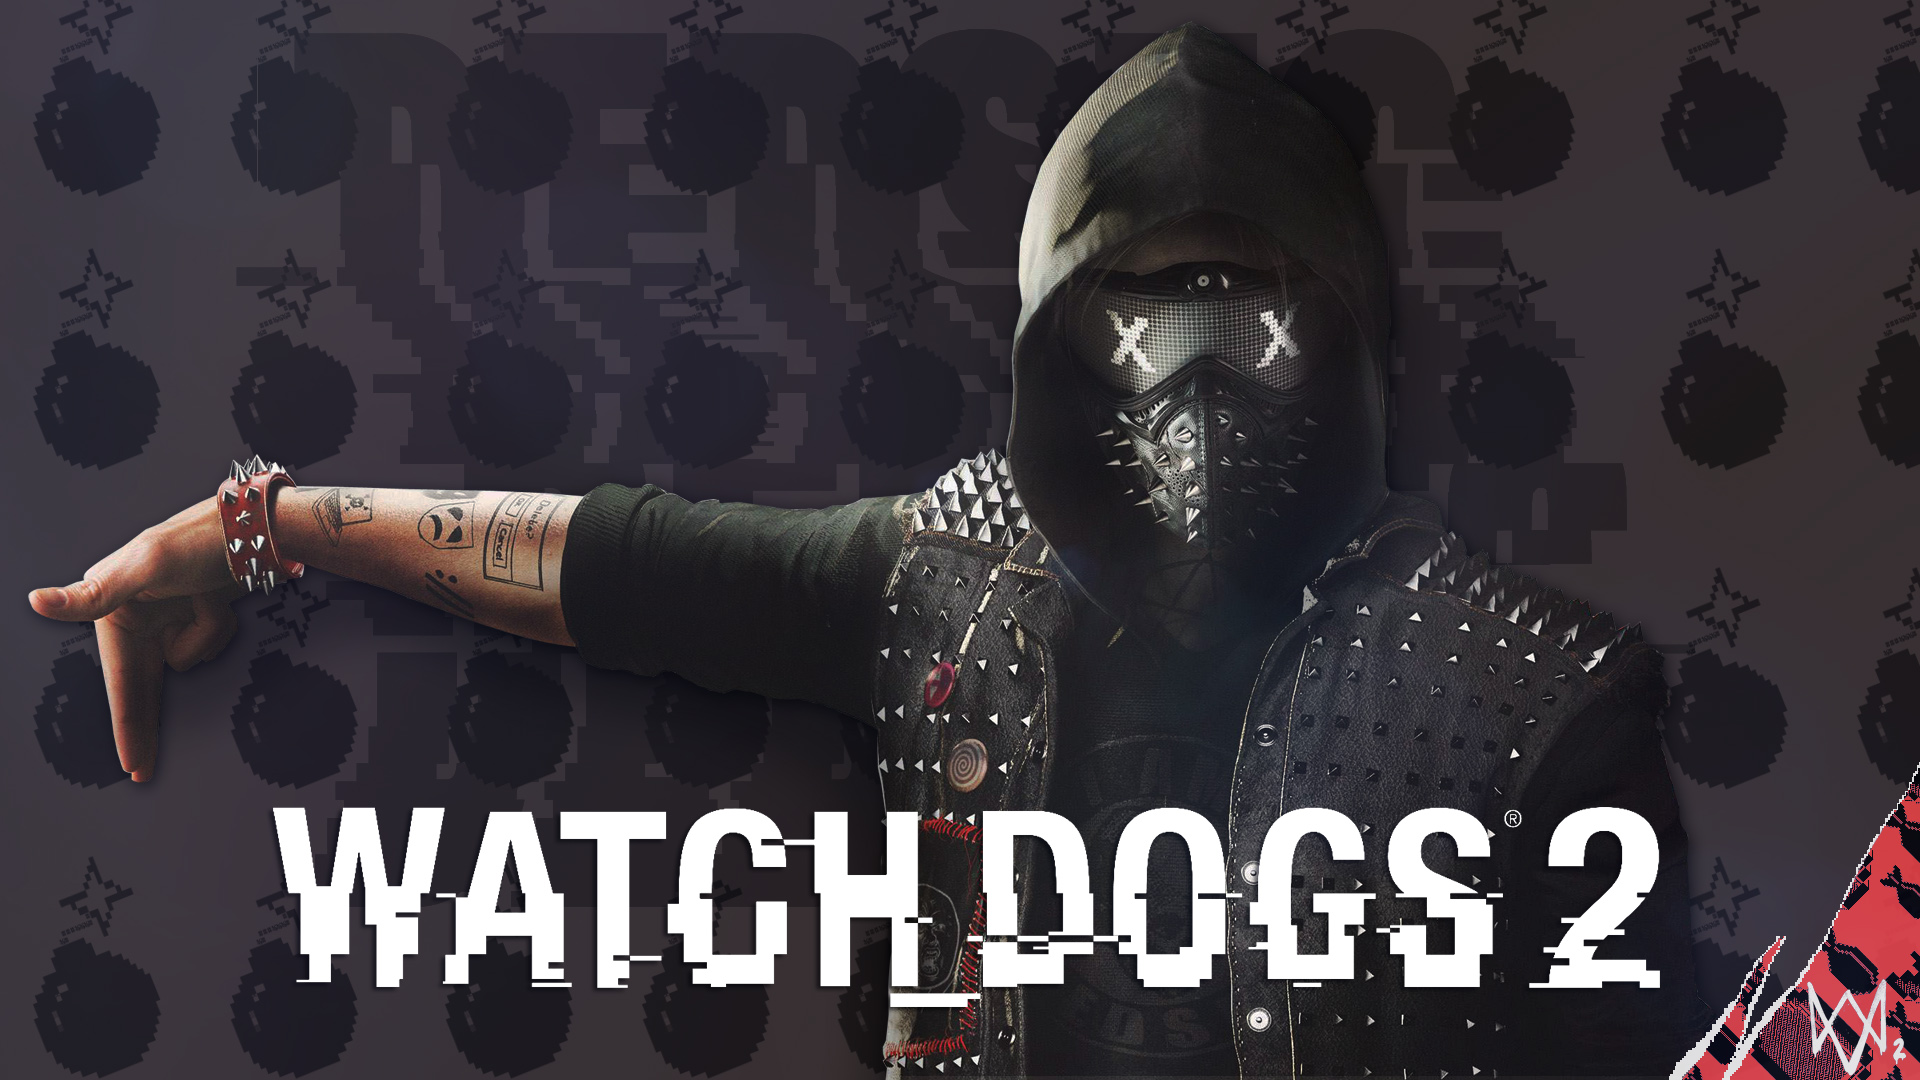 Watch Dogs Wrench Watch Dogs 2 DEDSEC 1920x1080